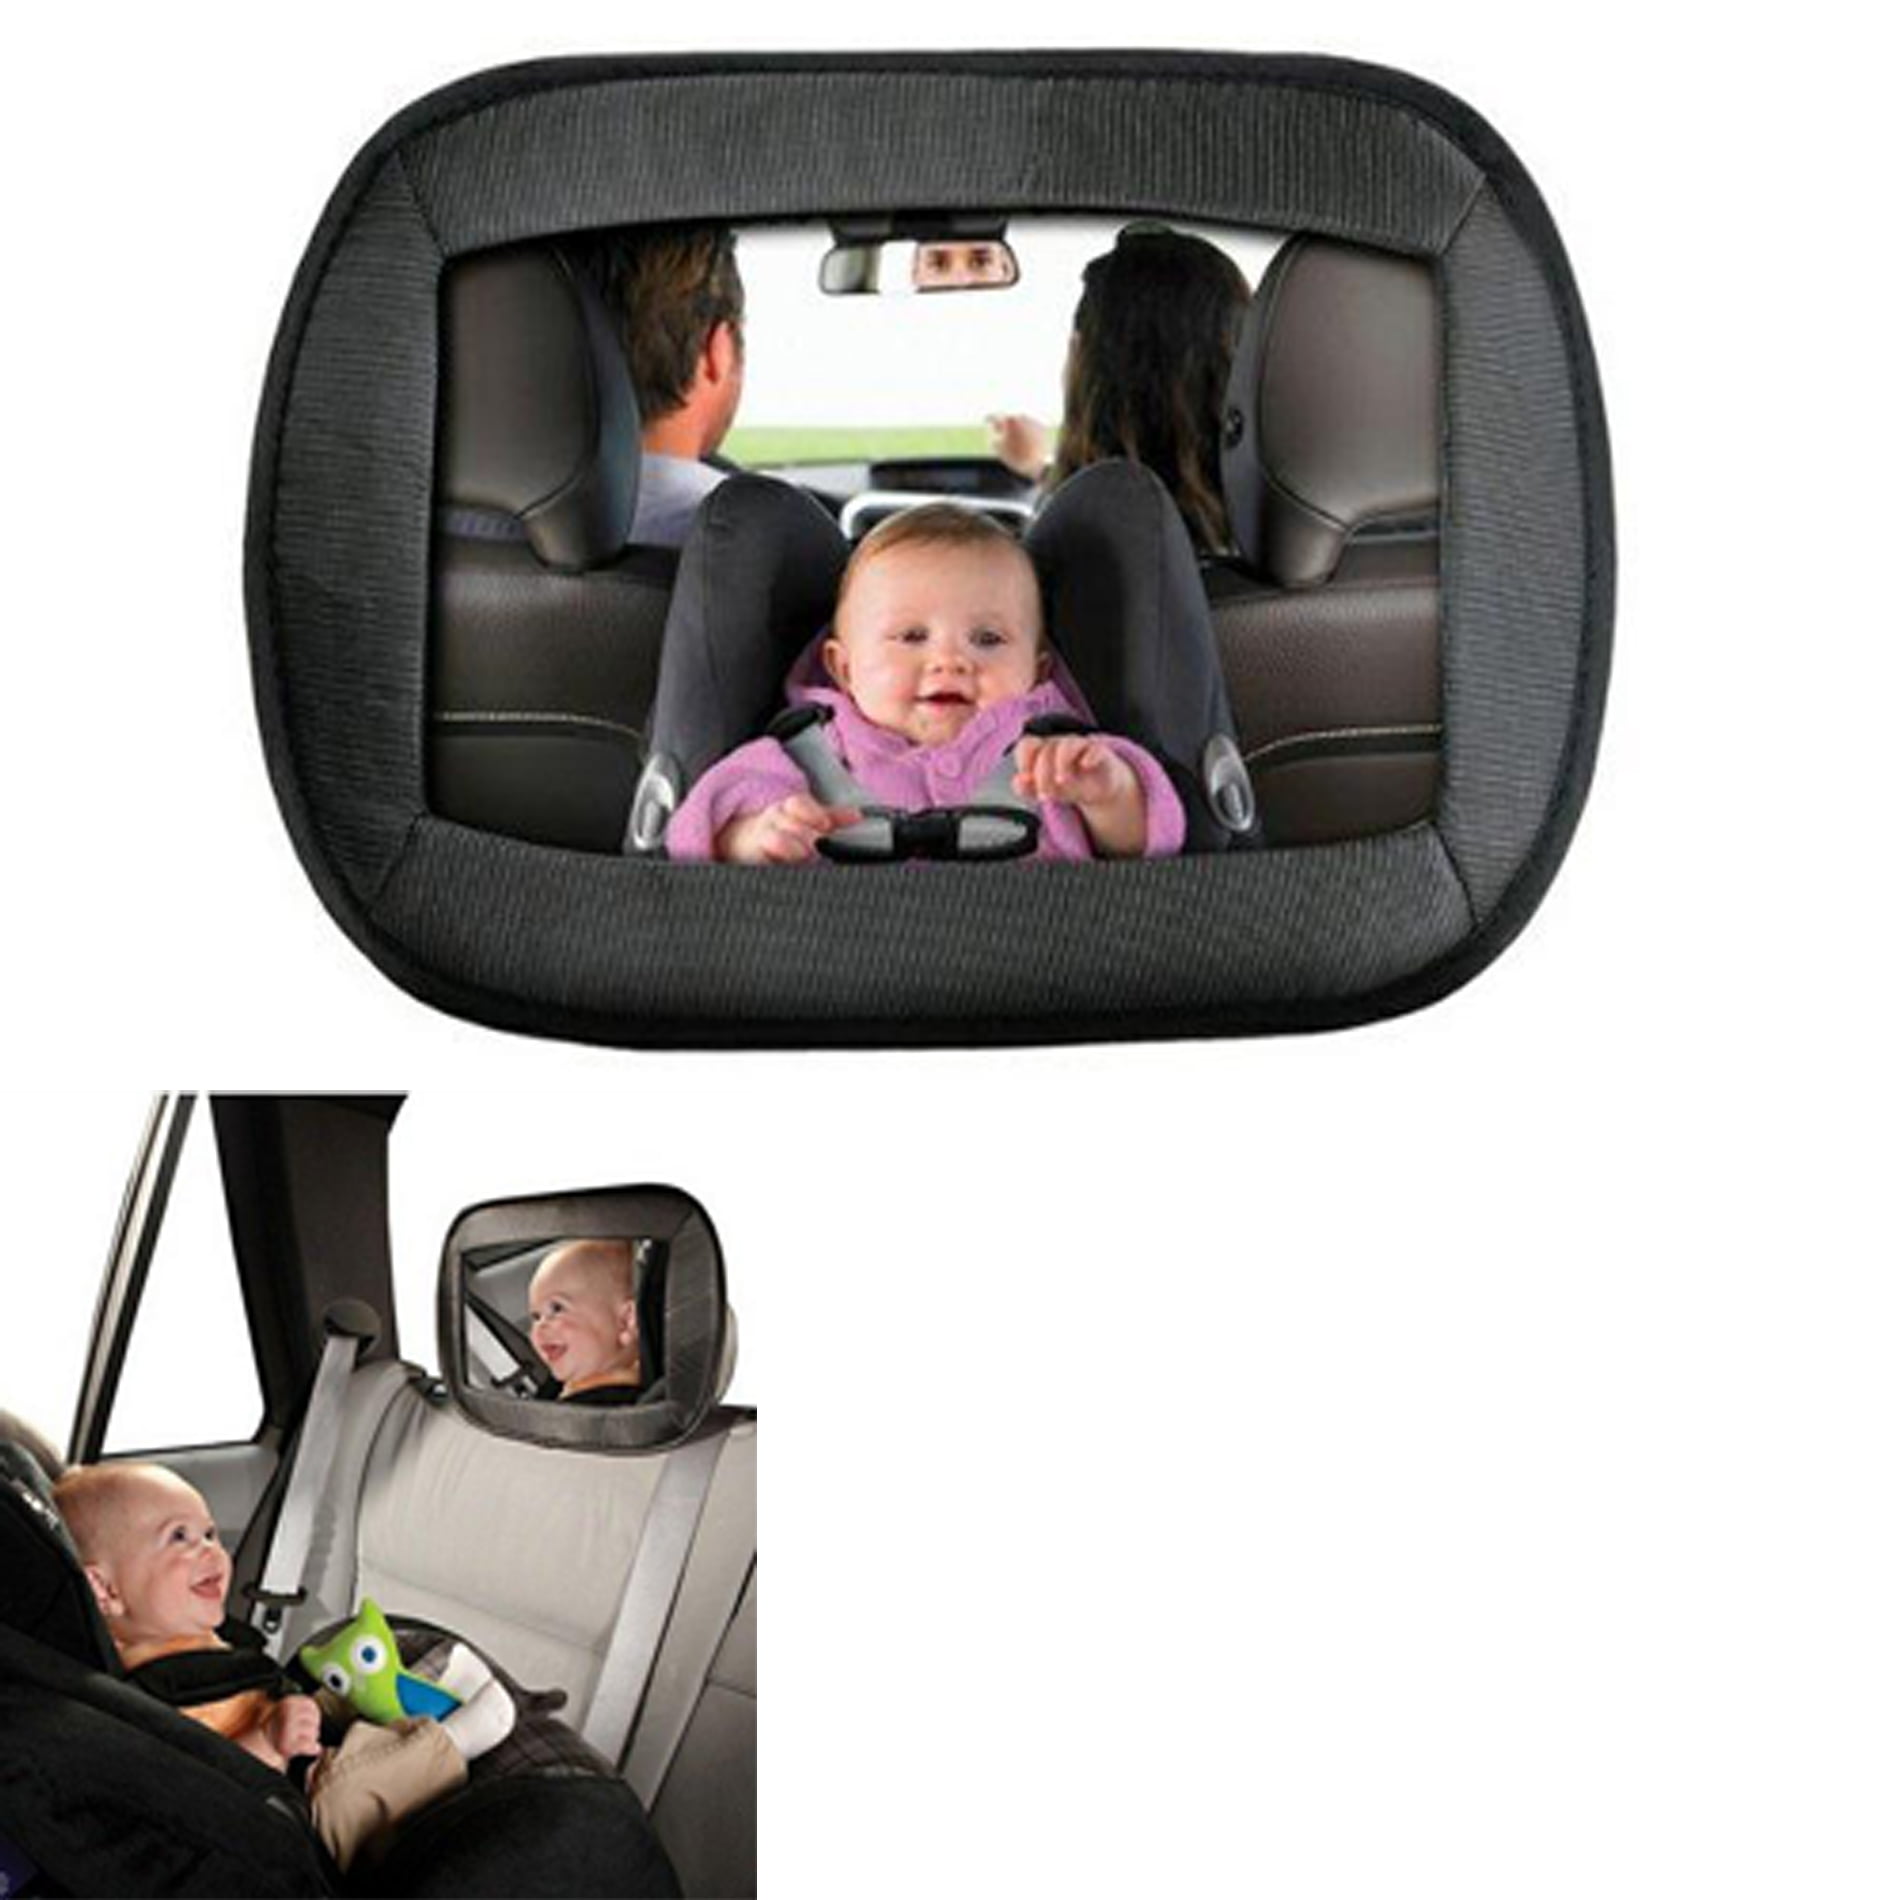 MJYT Baby Mirror for Car Backseat Rear View Facing with Wide Convex Shatterproof Glass Adjustable Car Back Seat Mirror